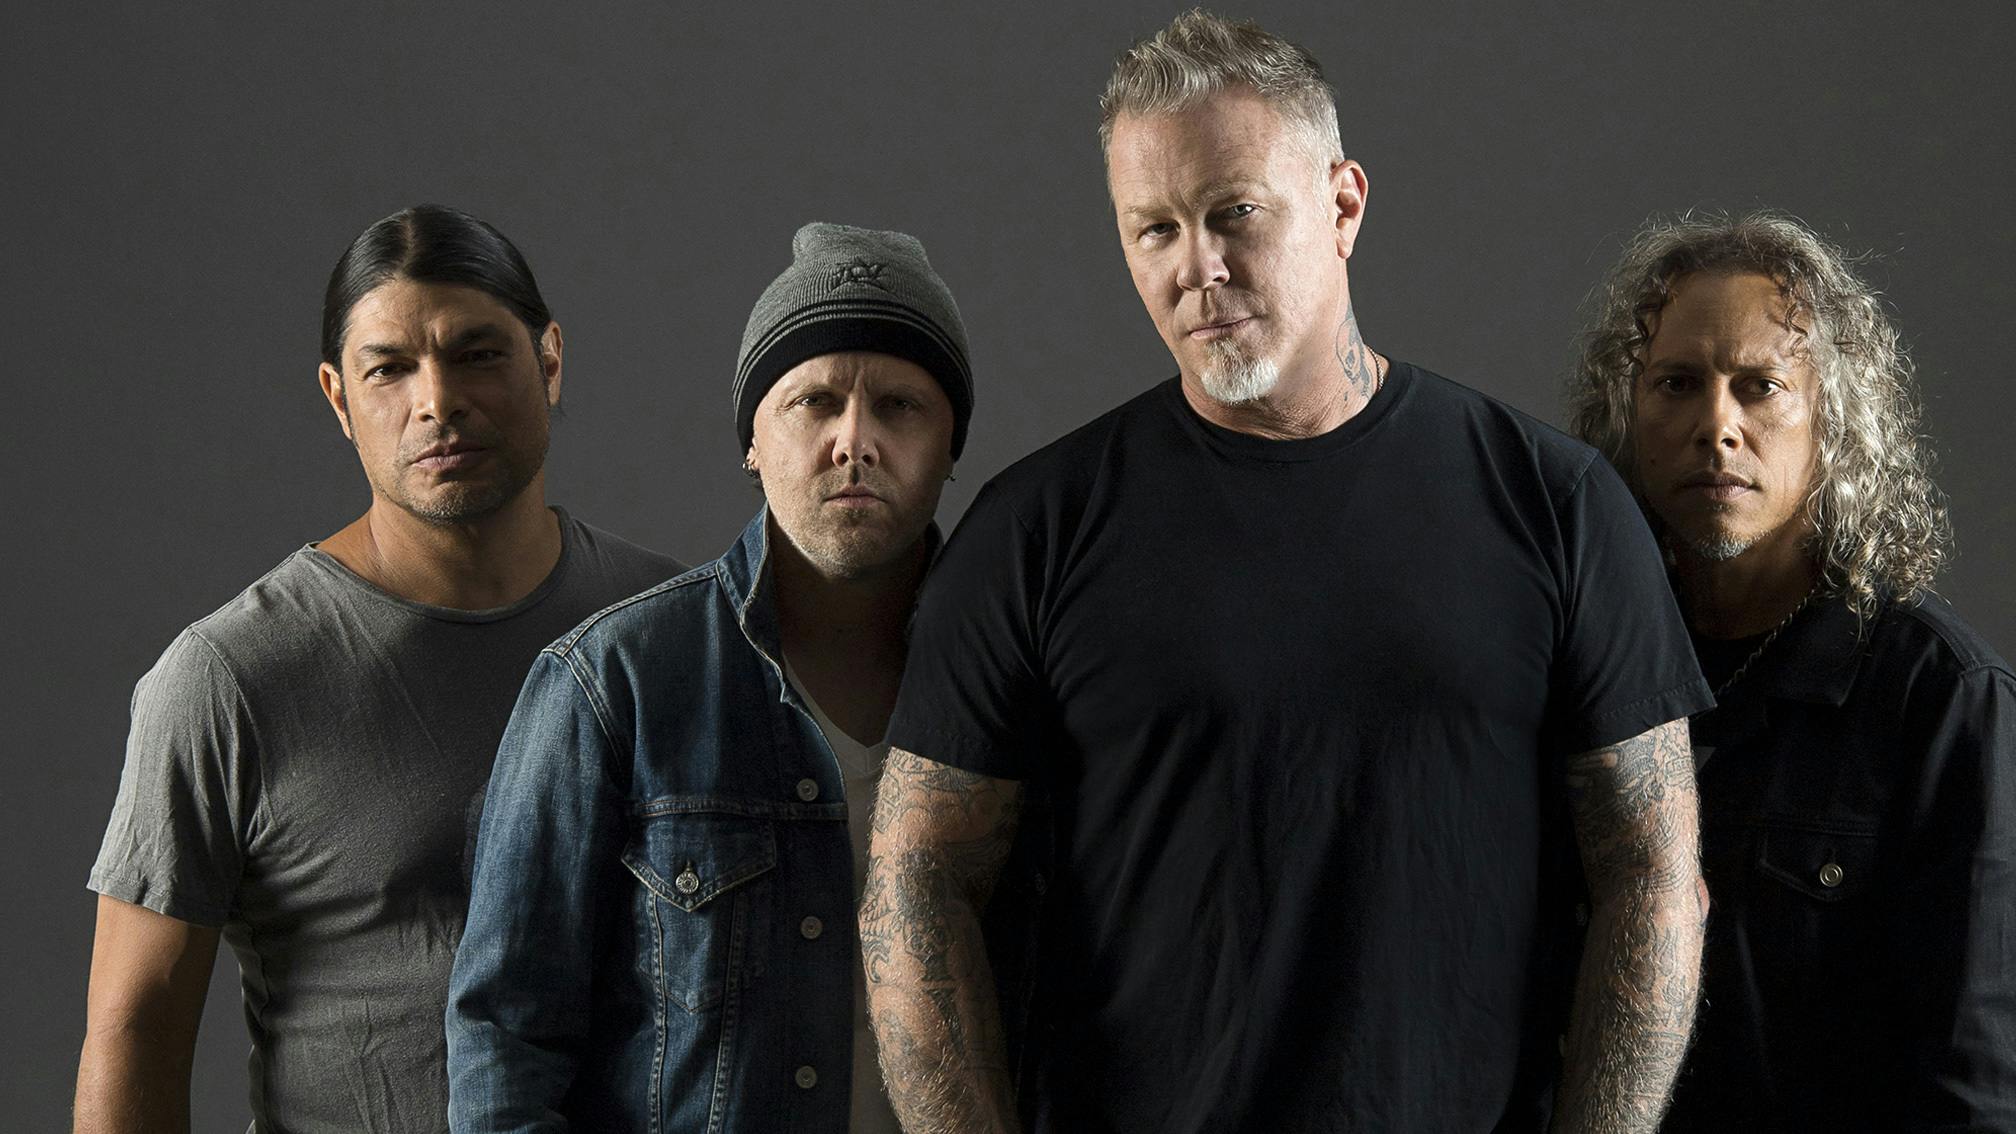 Metallica Are A Month Into Some “Pretty Serious Writing” For Their Next Album